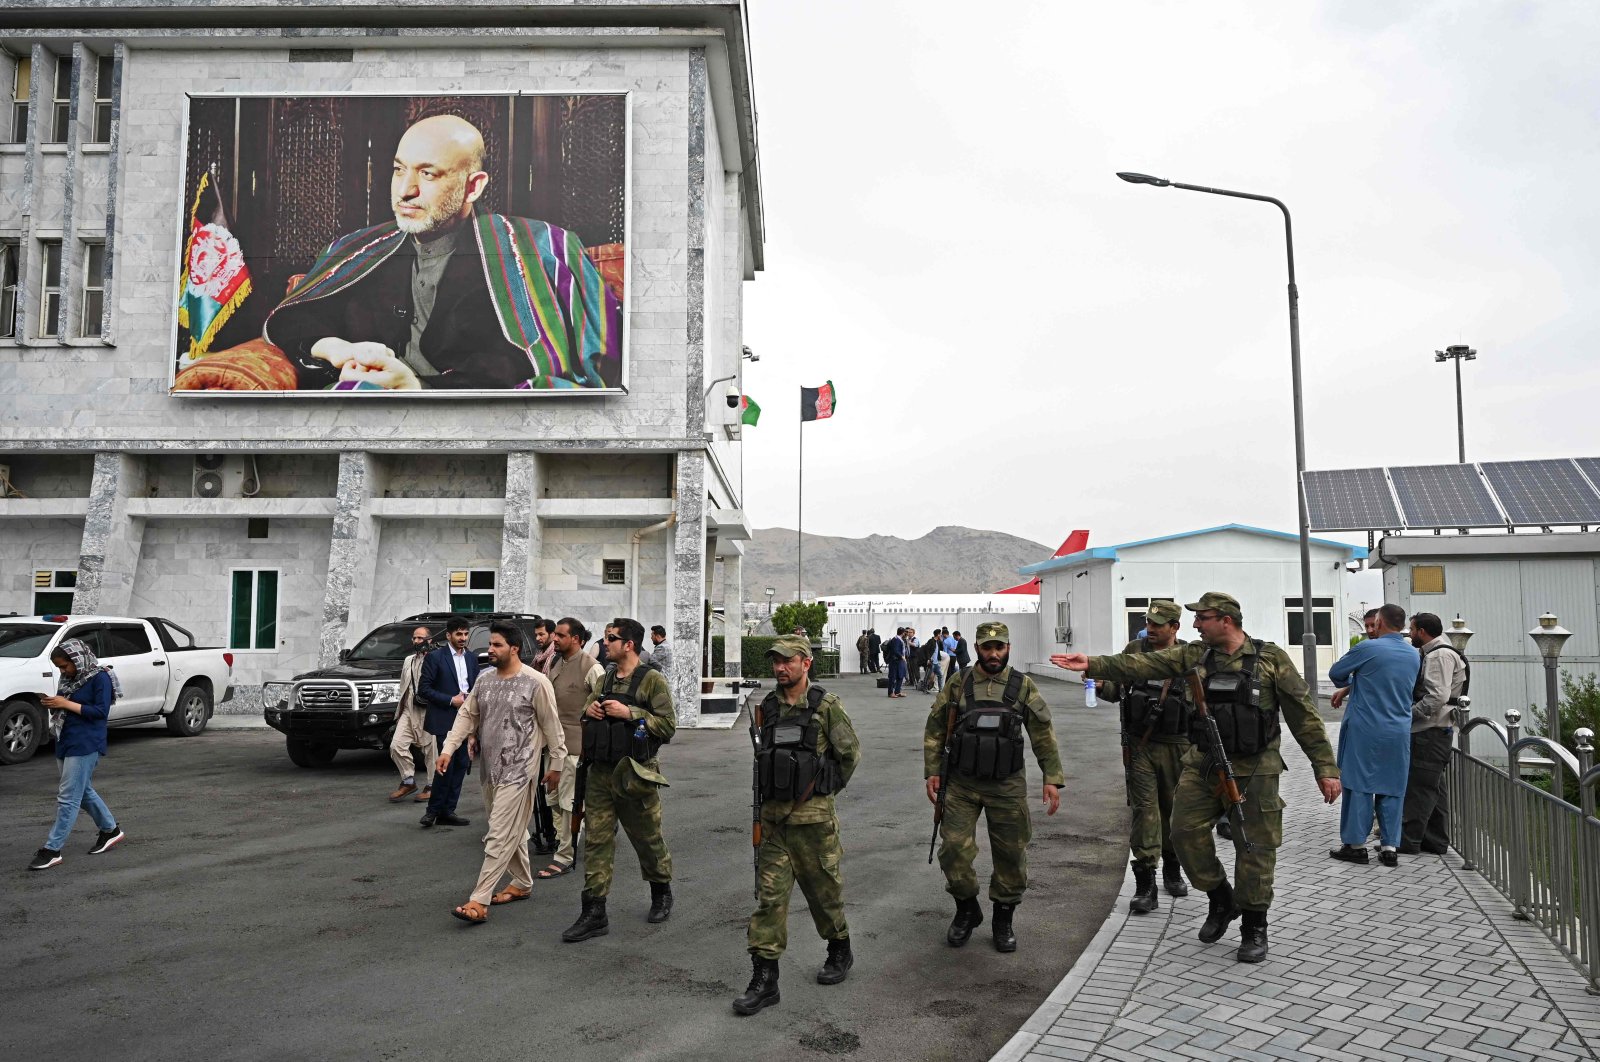 Security personnel walk past a poster of former Afghan President Hamid Karzai at the Hamid Karzai International Airport in Kabul, Afghanistan, July 16, 2021. (AFP Photo)